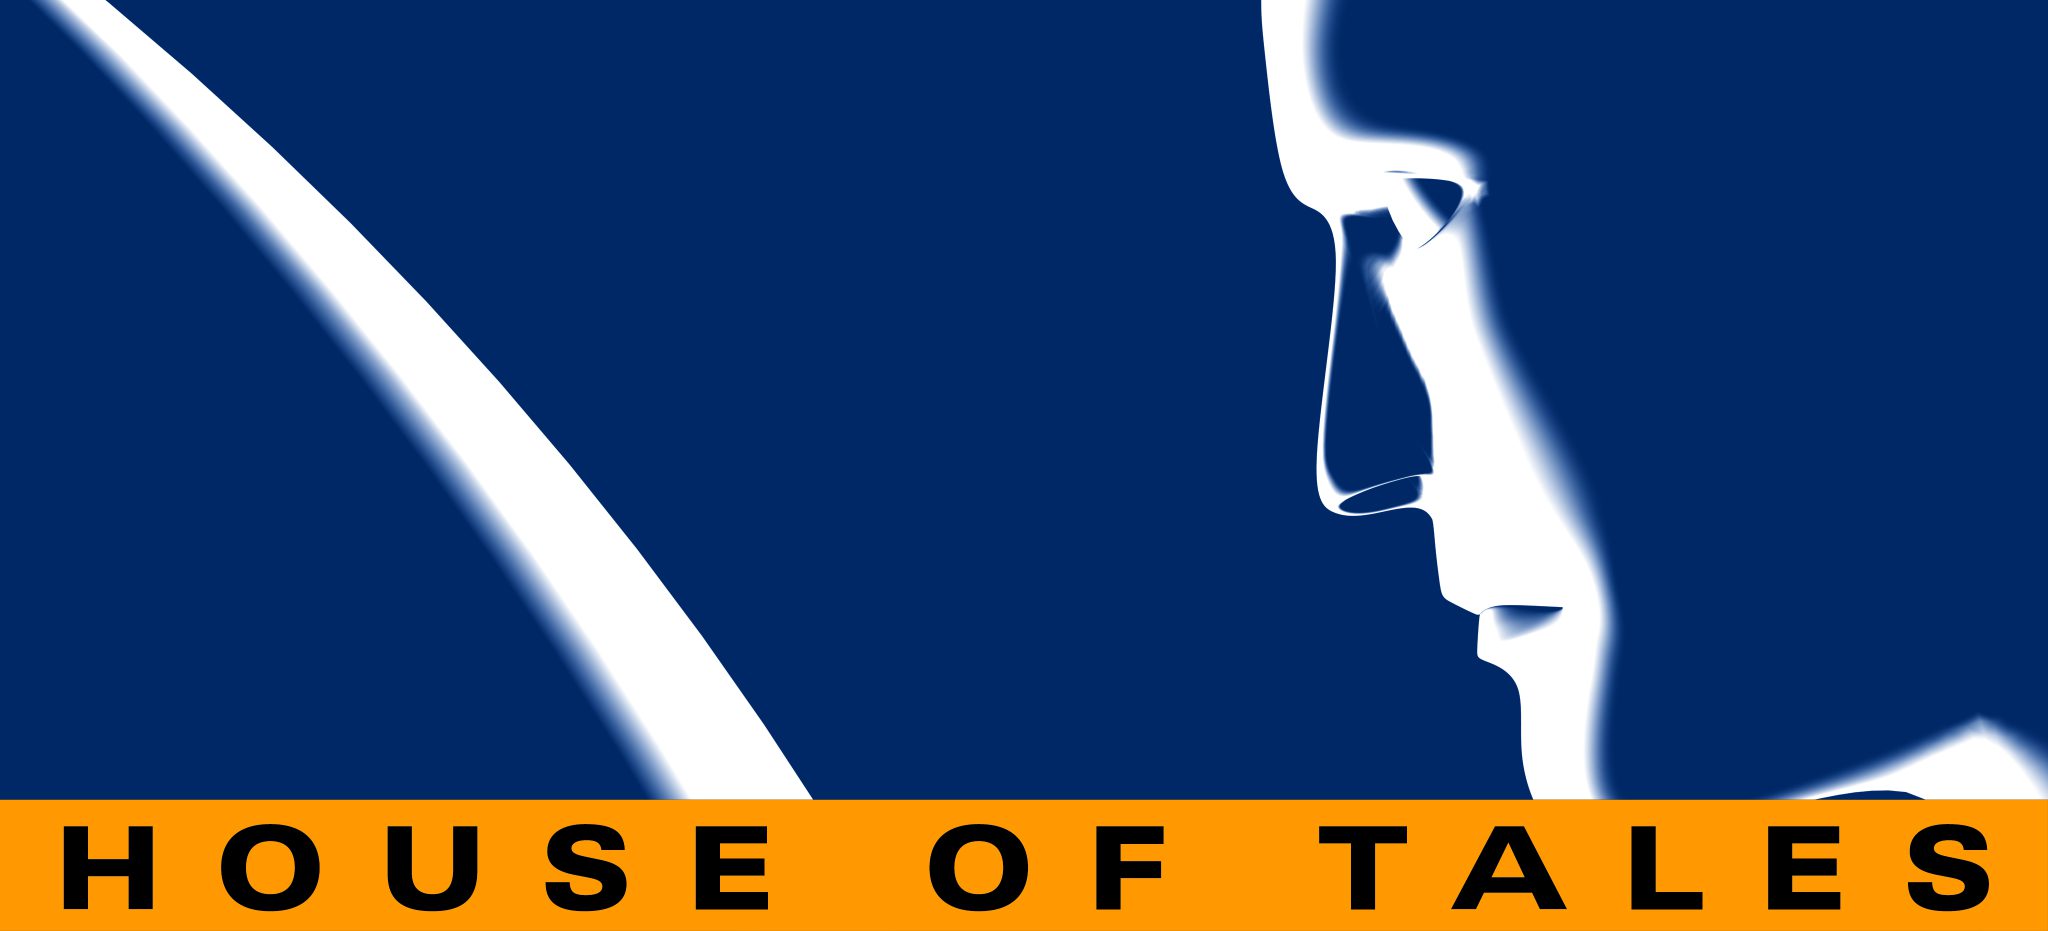 House of Tales -logo